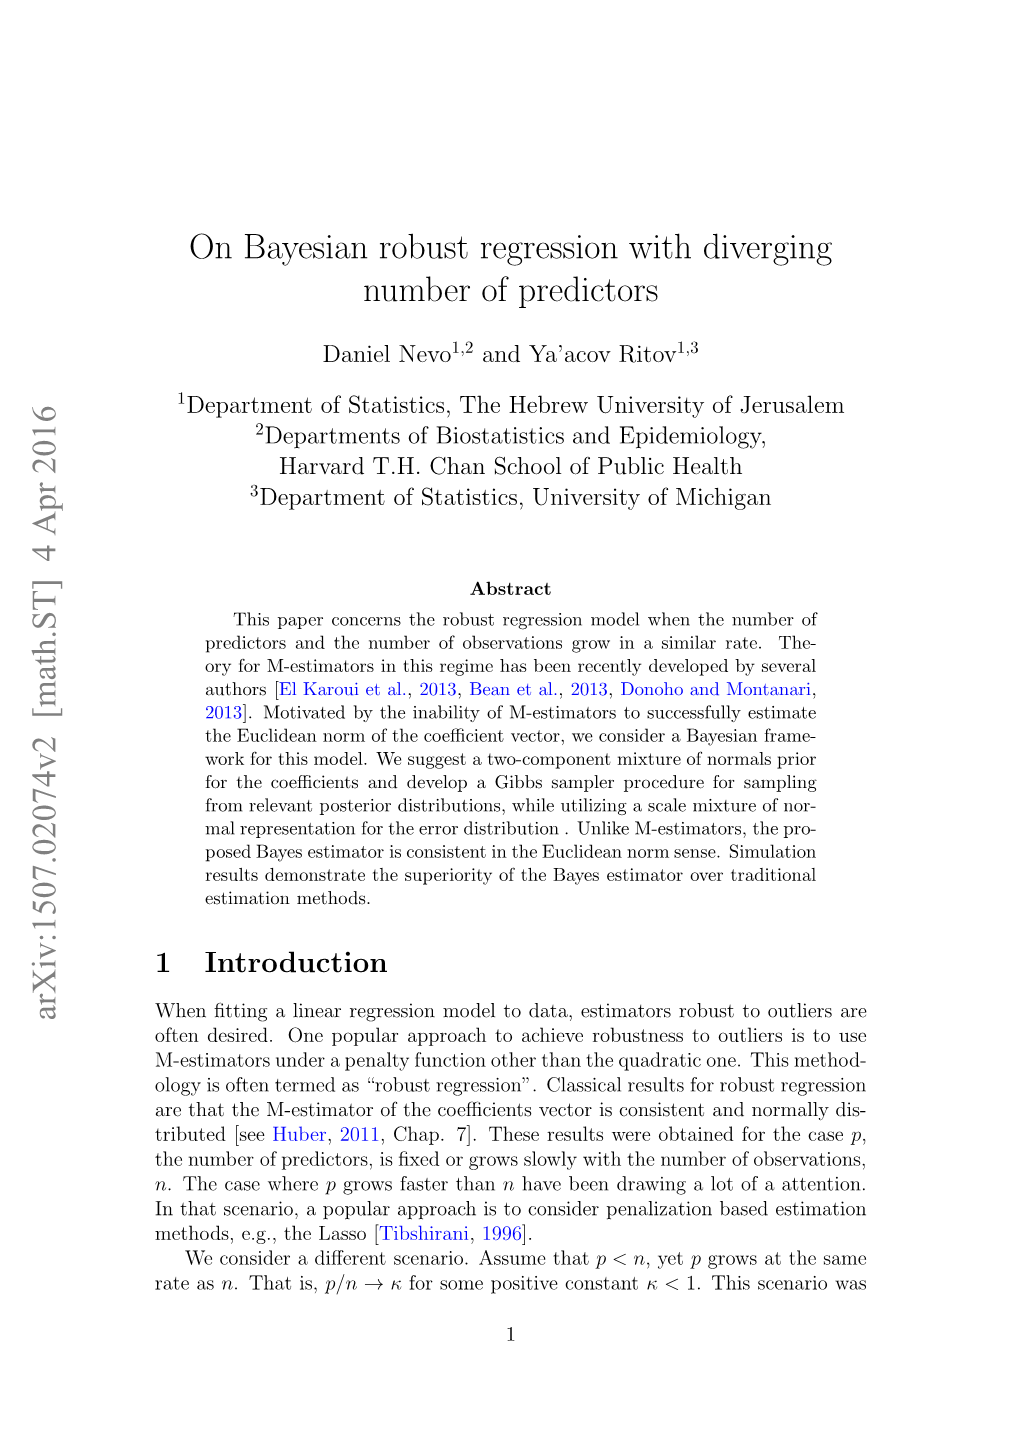 On Bayesian Robust Regression with Diverging Number of Predictors